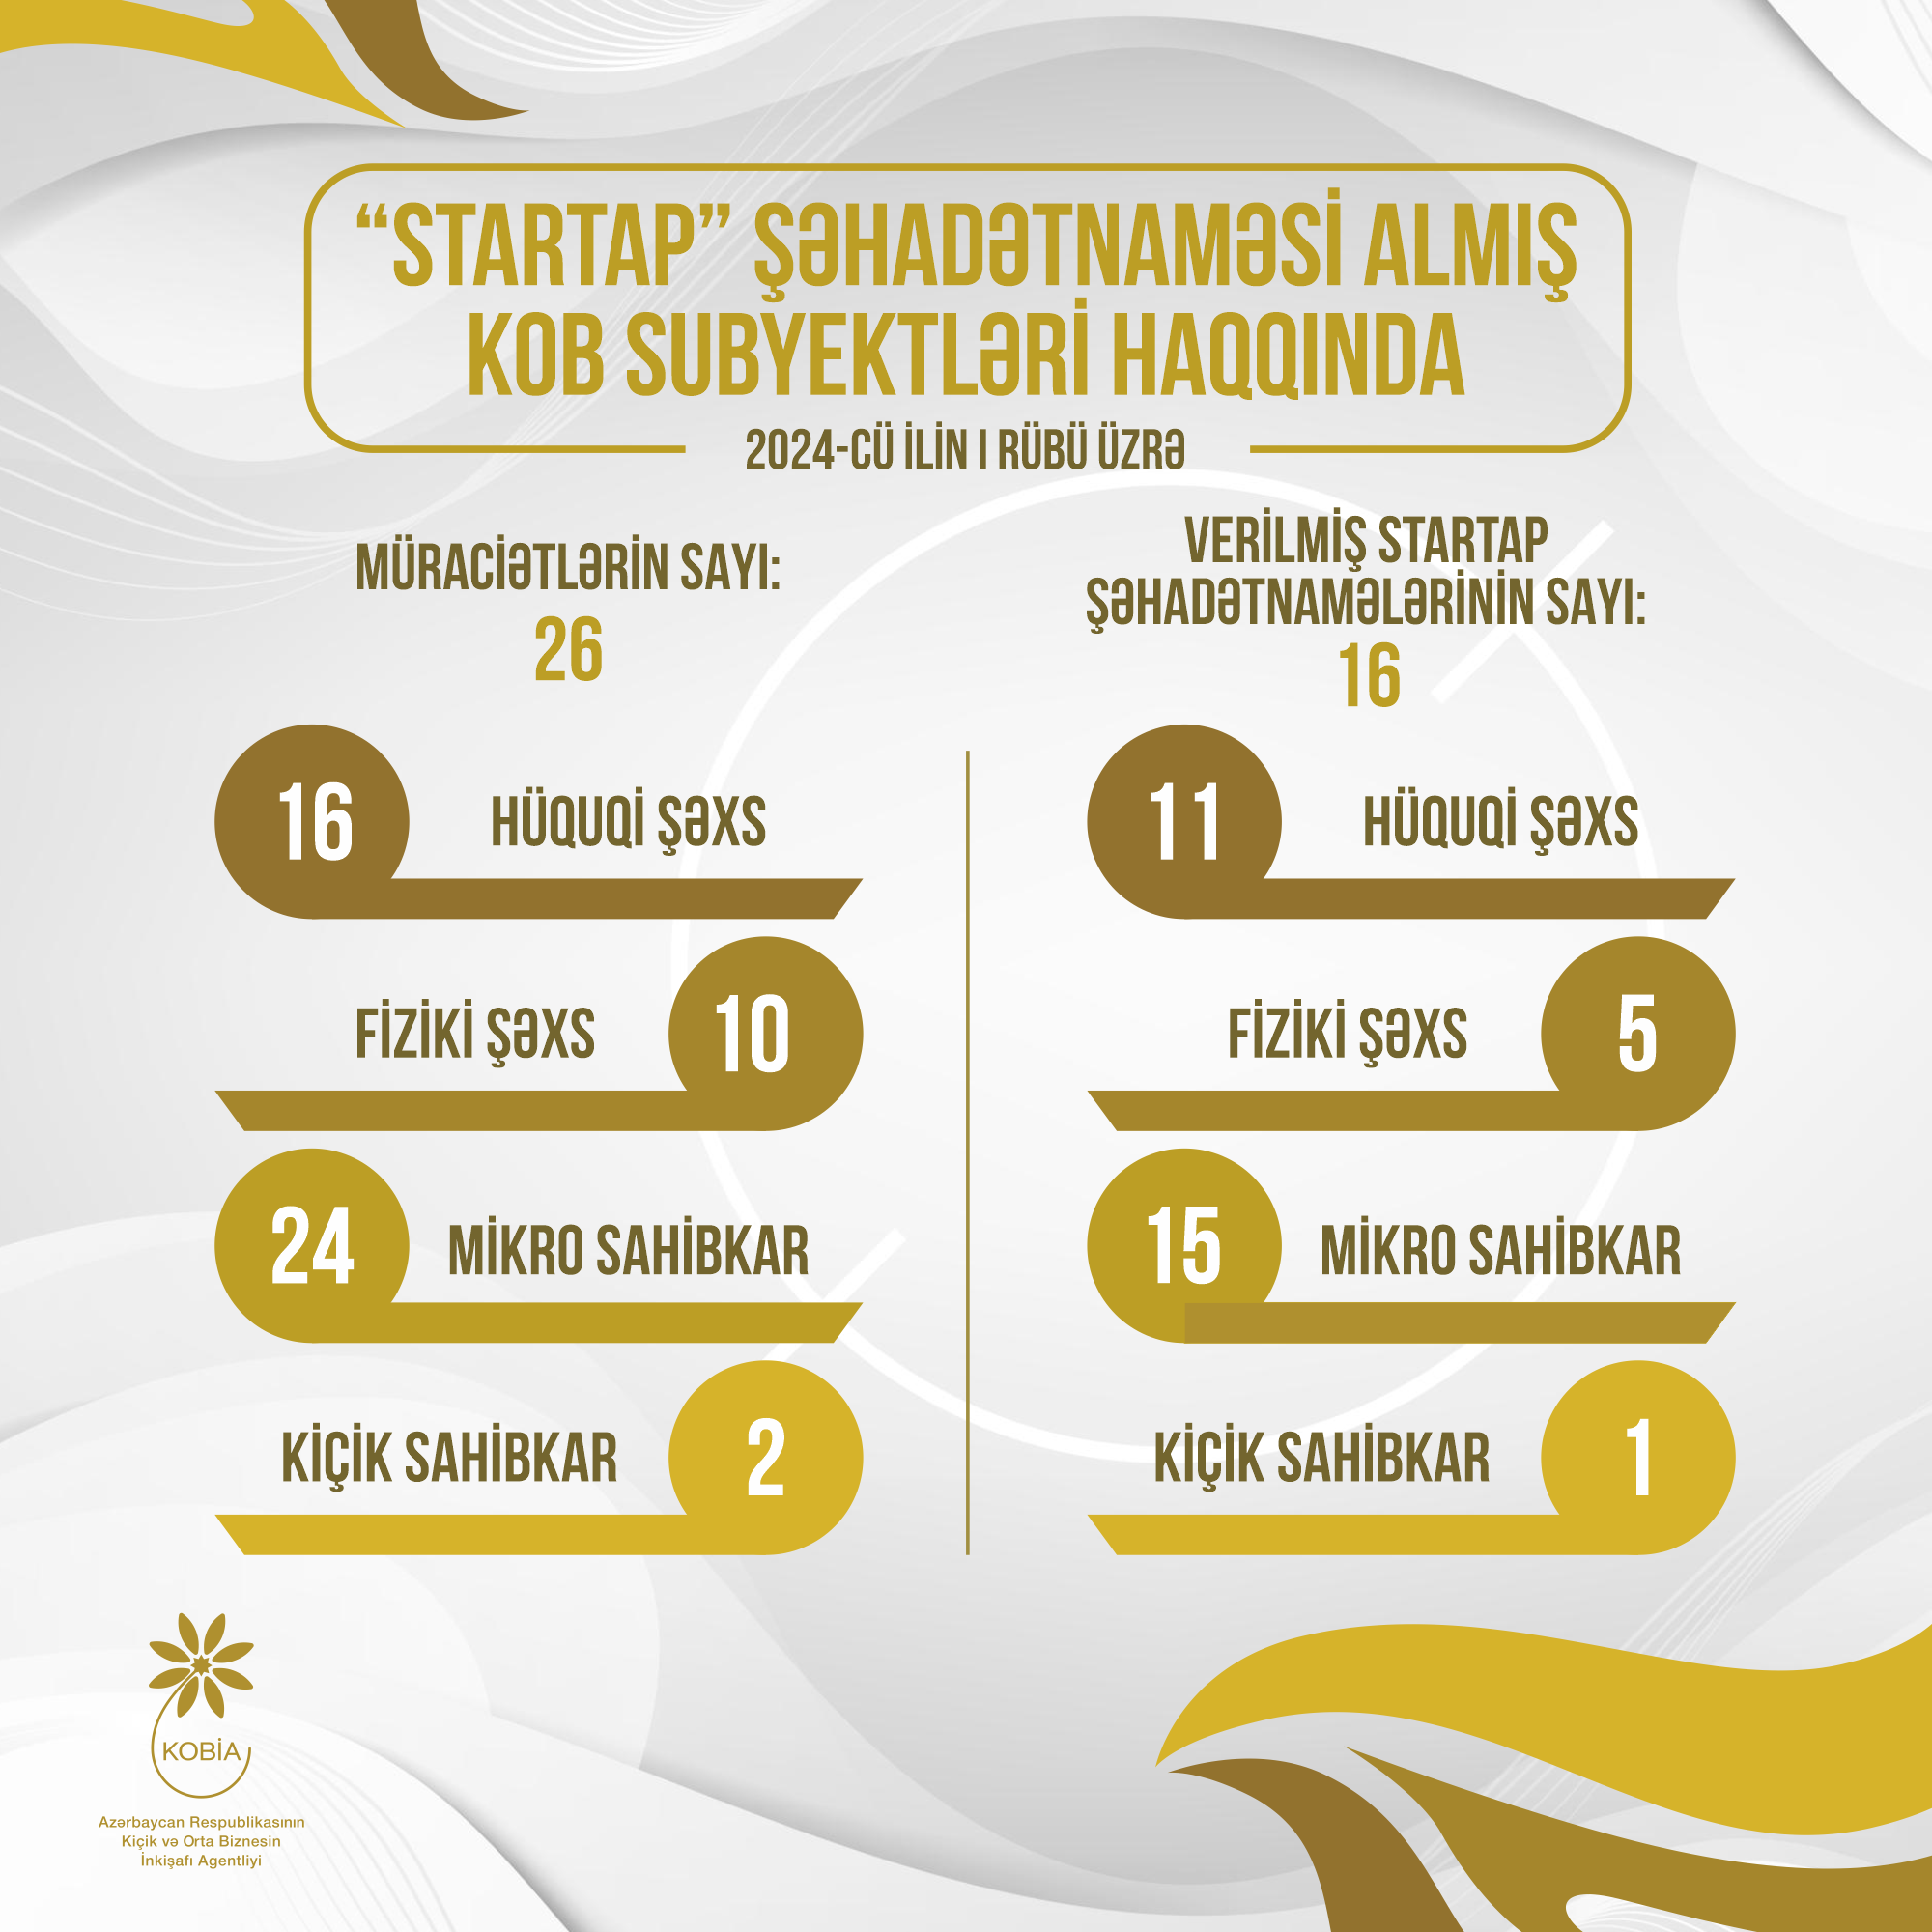 16 KOB entities were awarded with "Startup" certificates in the first quarter of this year 